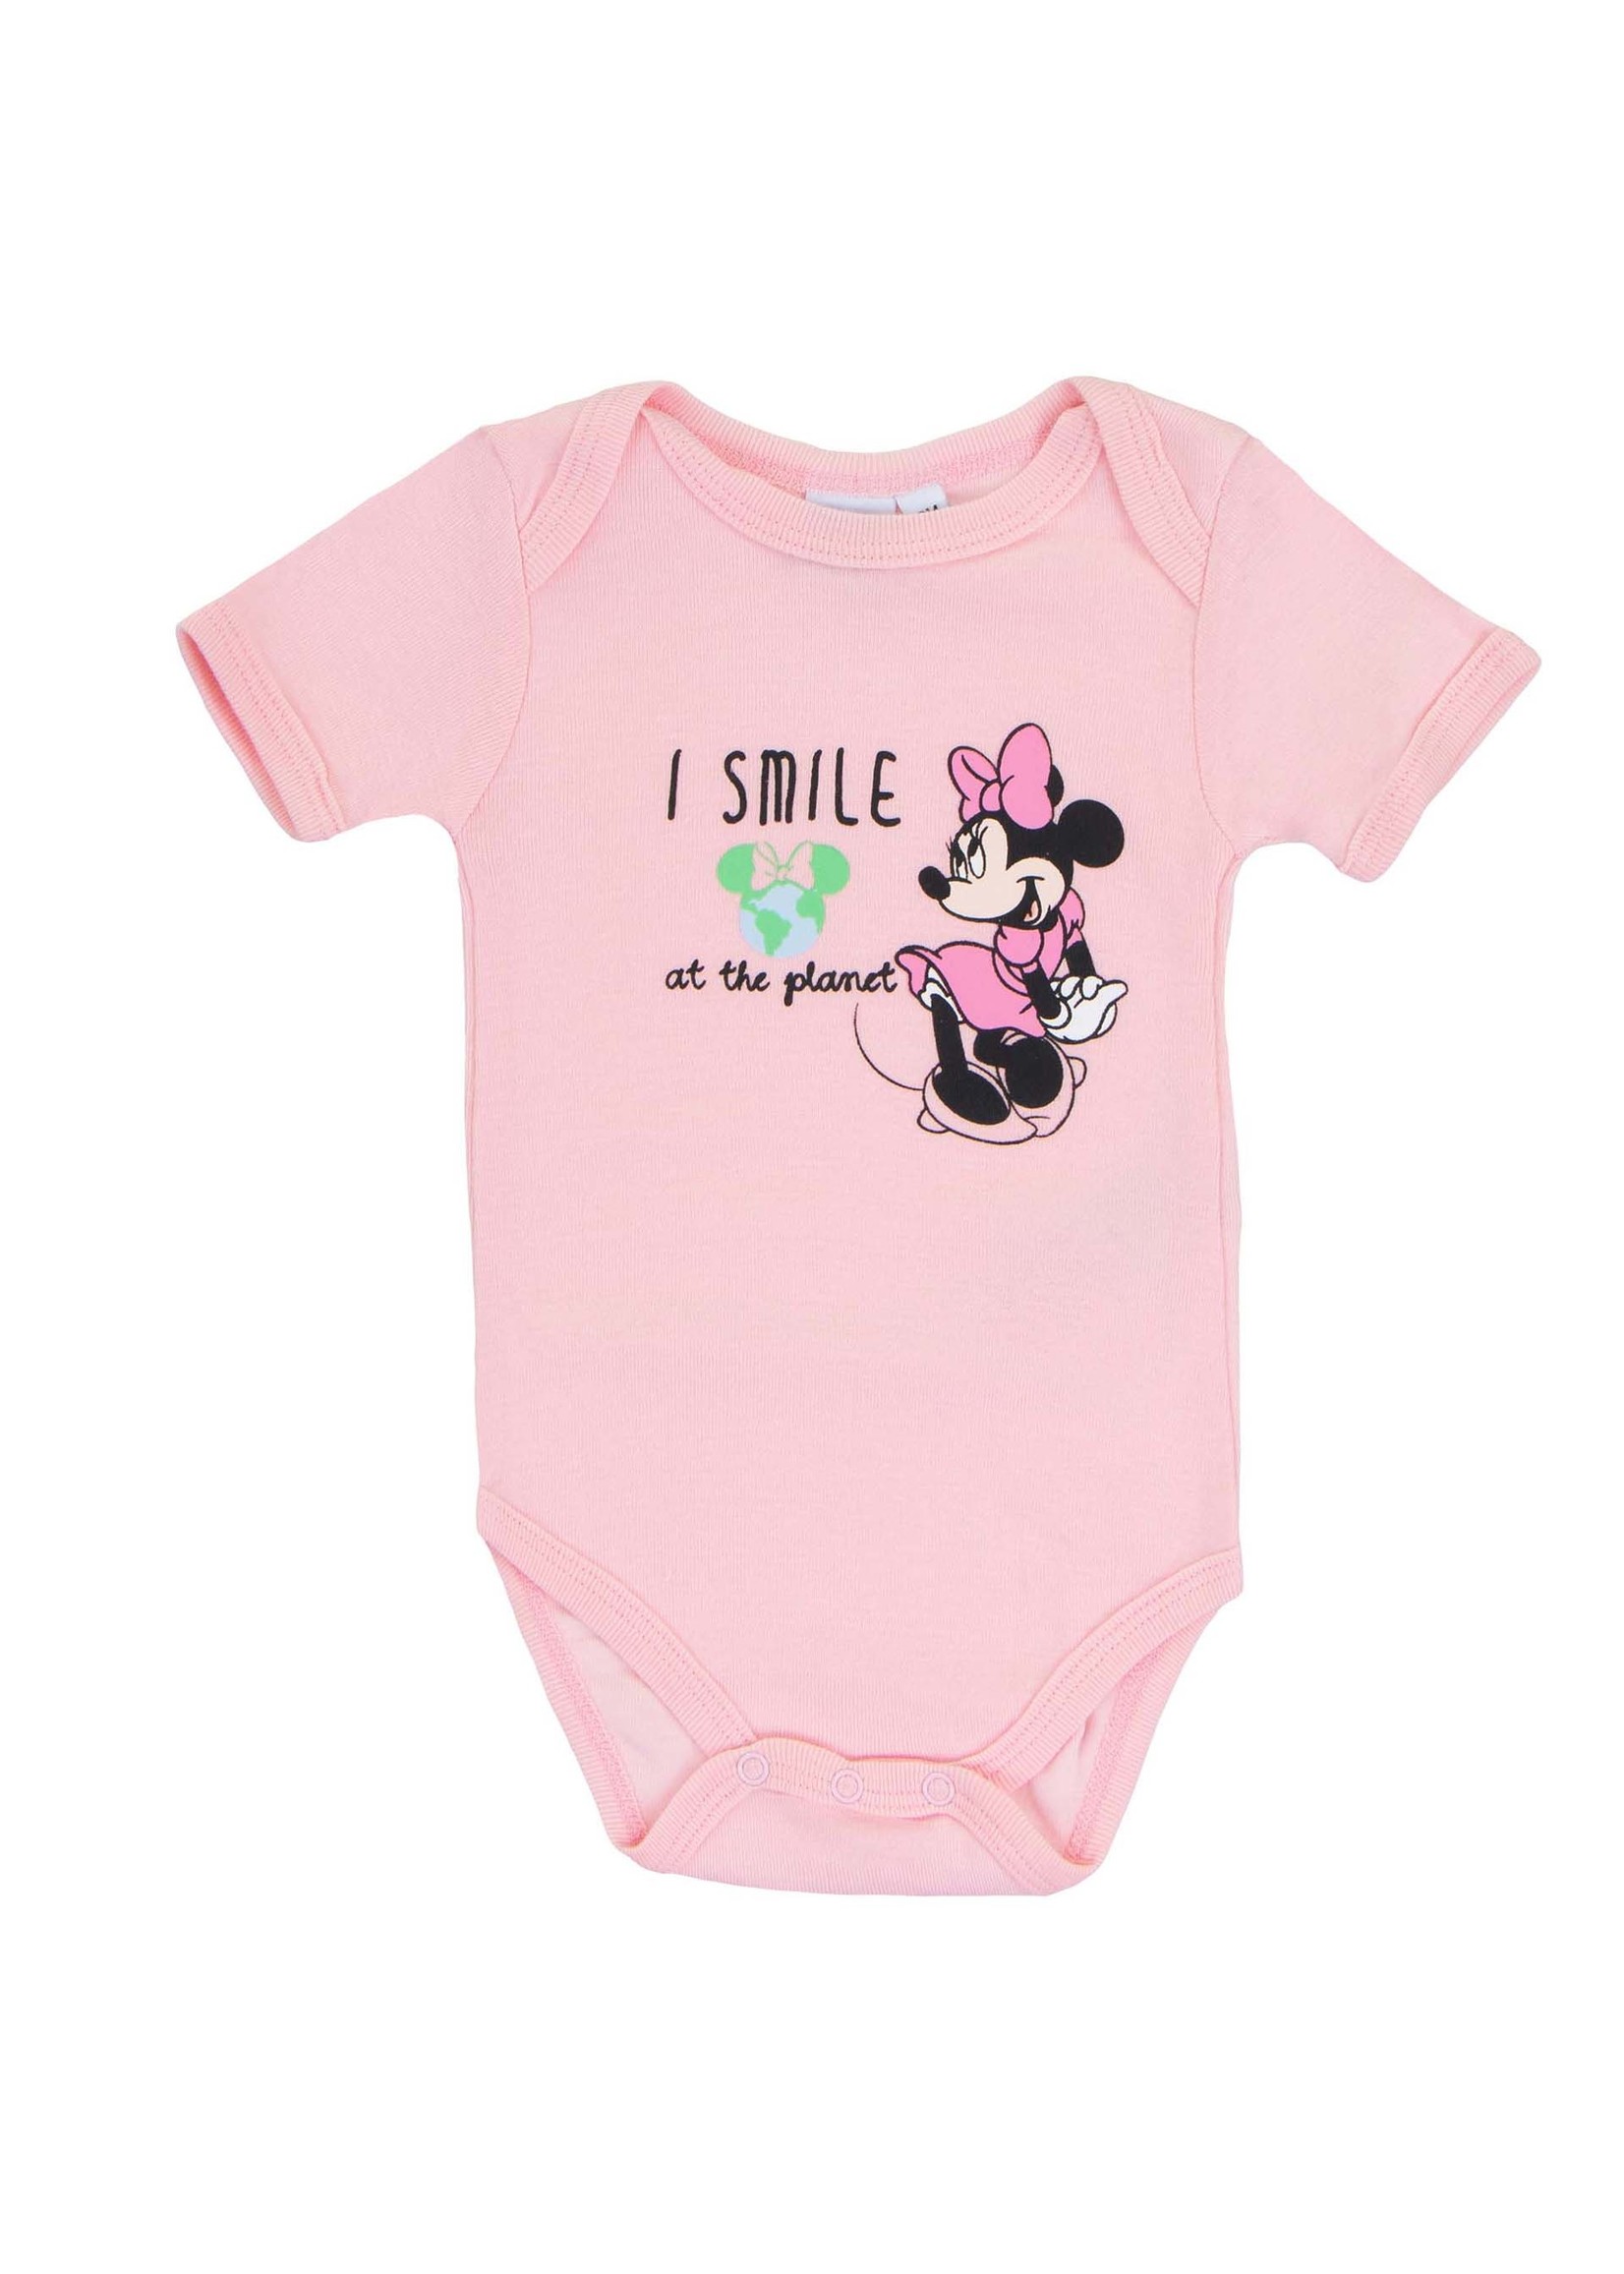 Disney baby Minnie Mouse organic rompers from Disney baby 2 pack